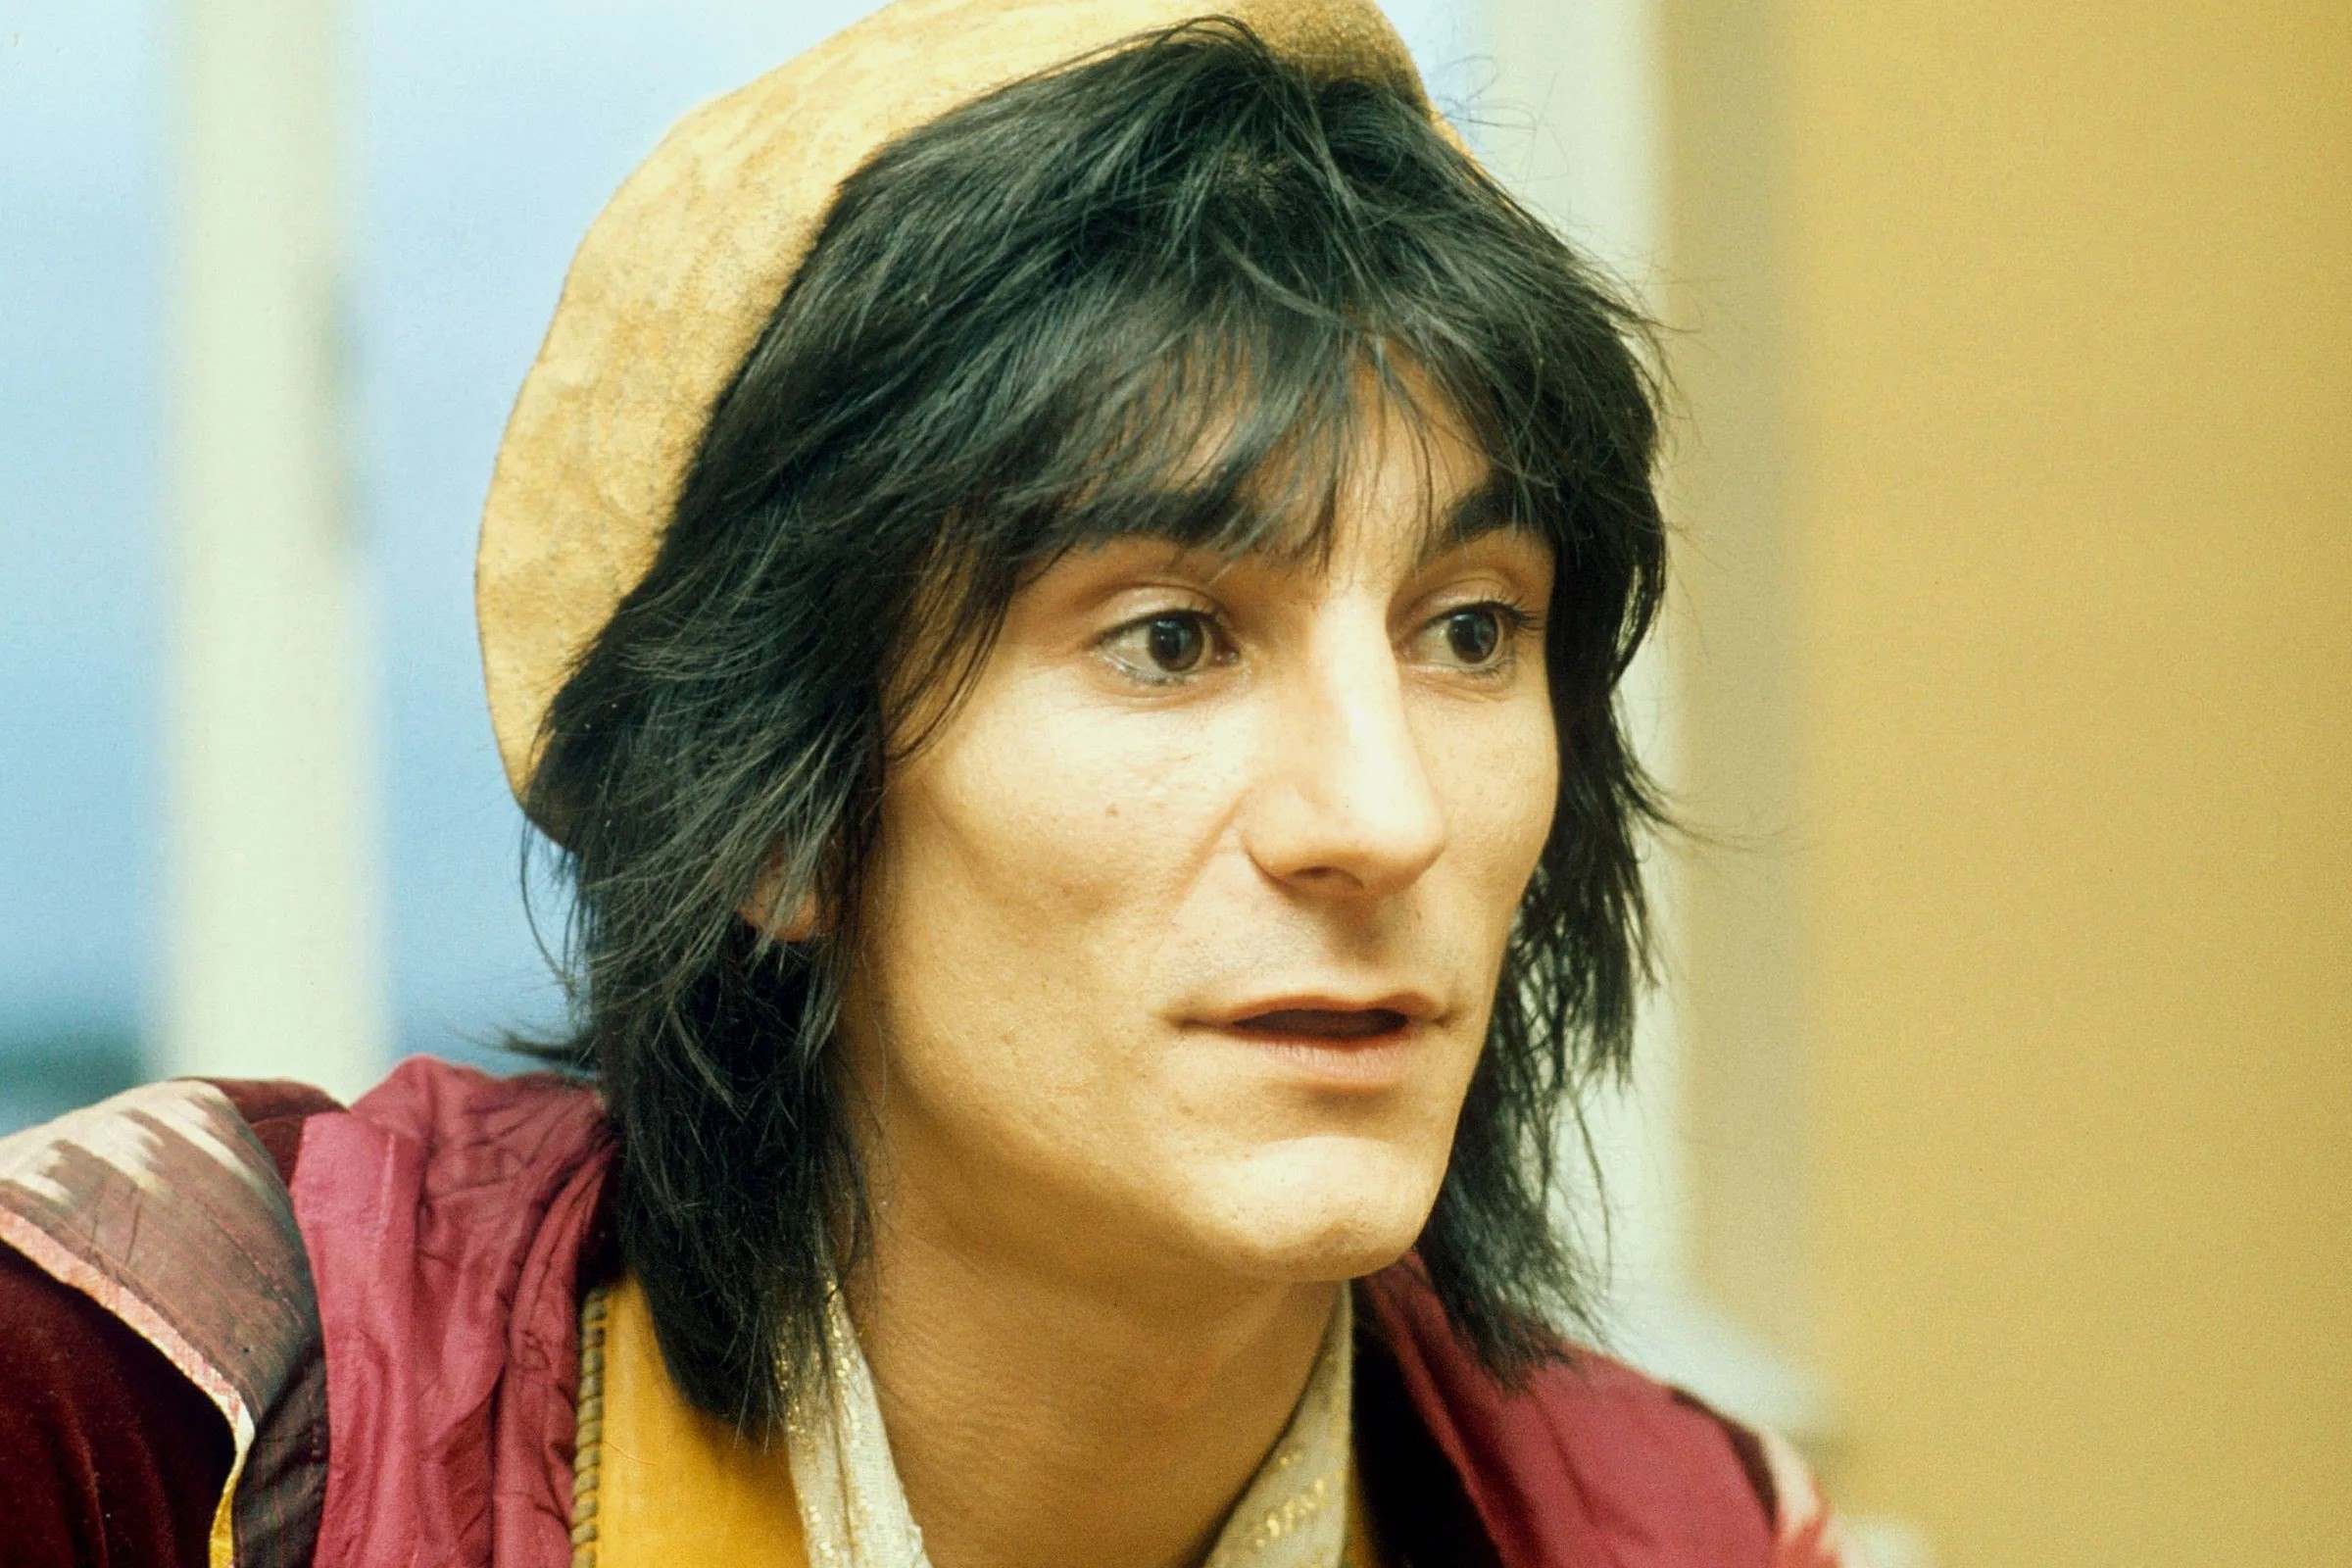 25 Astonishing Facts About Ronnie Wood - Facts.net